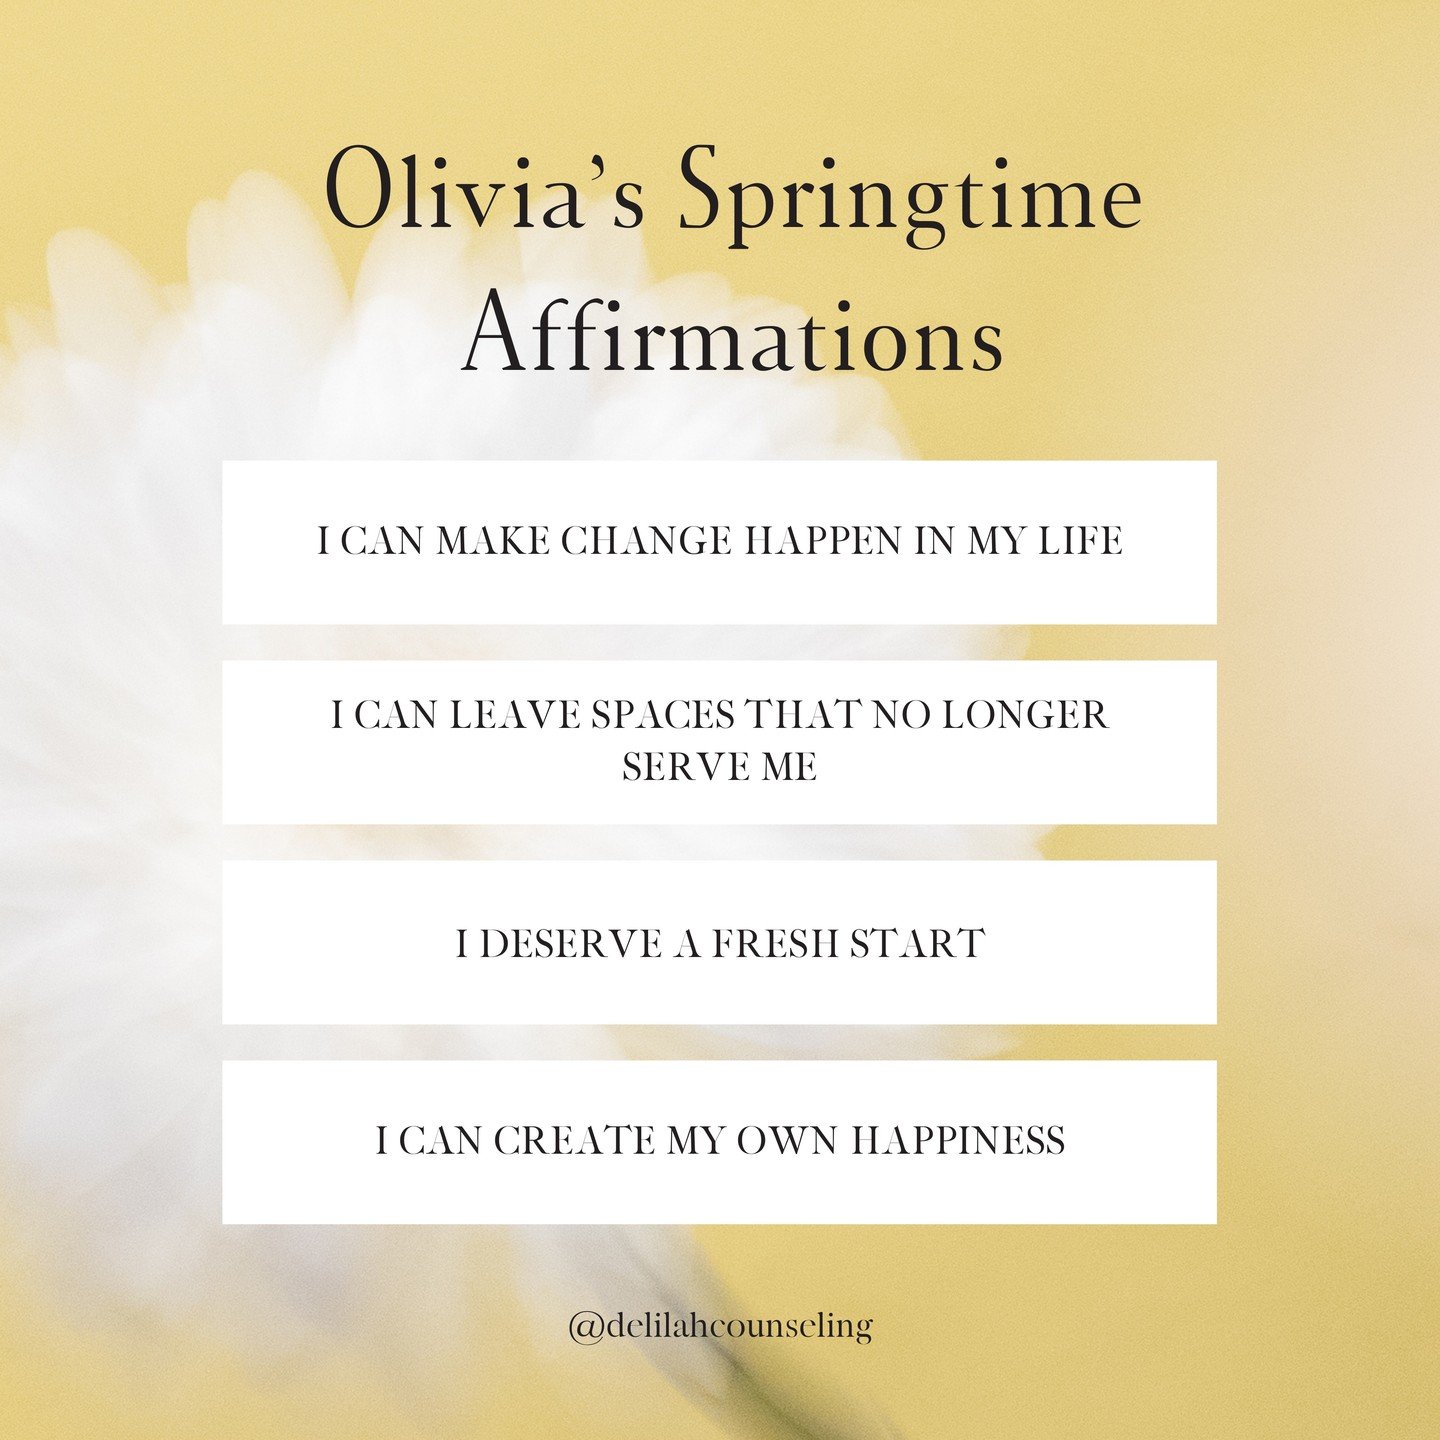 &quot;It's important to reevaluate your affirmations every once in a while and determine if they are still relevant to your life space. Spring can be a fresh start and a reminder that the sun will shine again. Put yourself in control of that fresh st